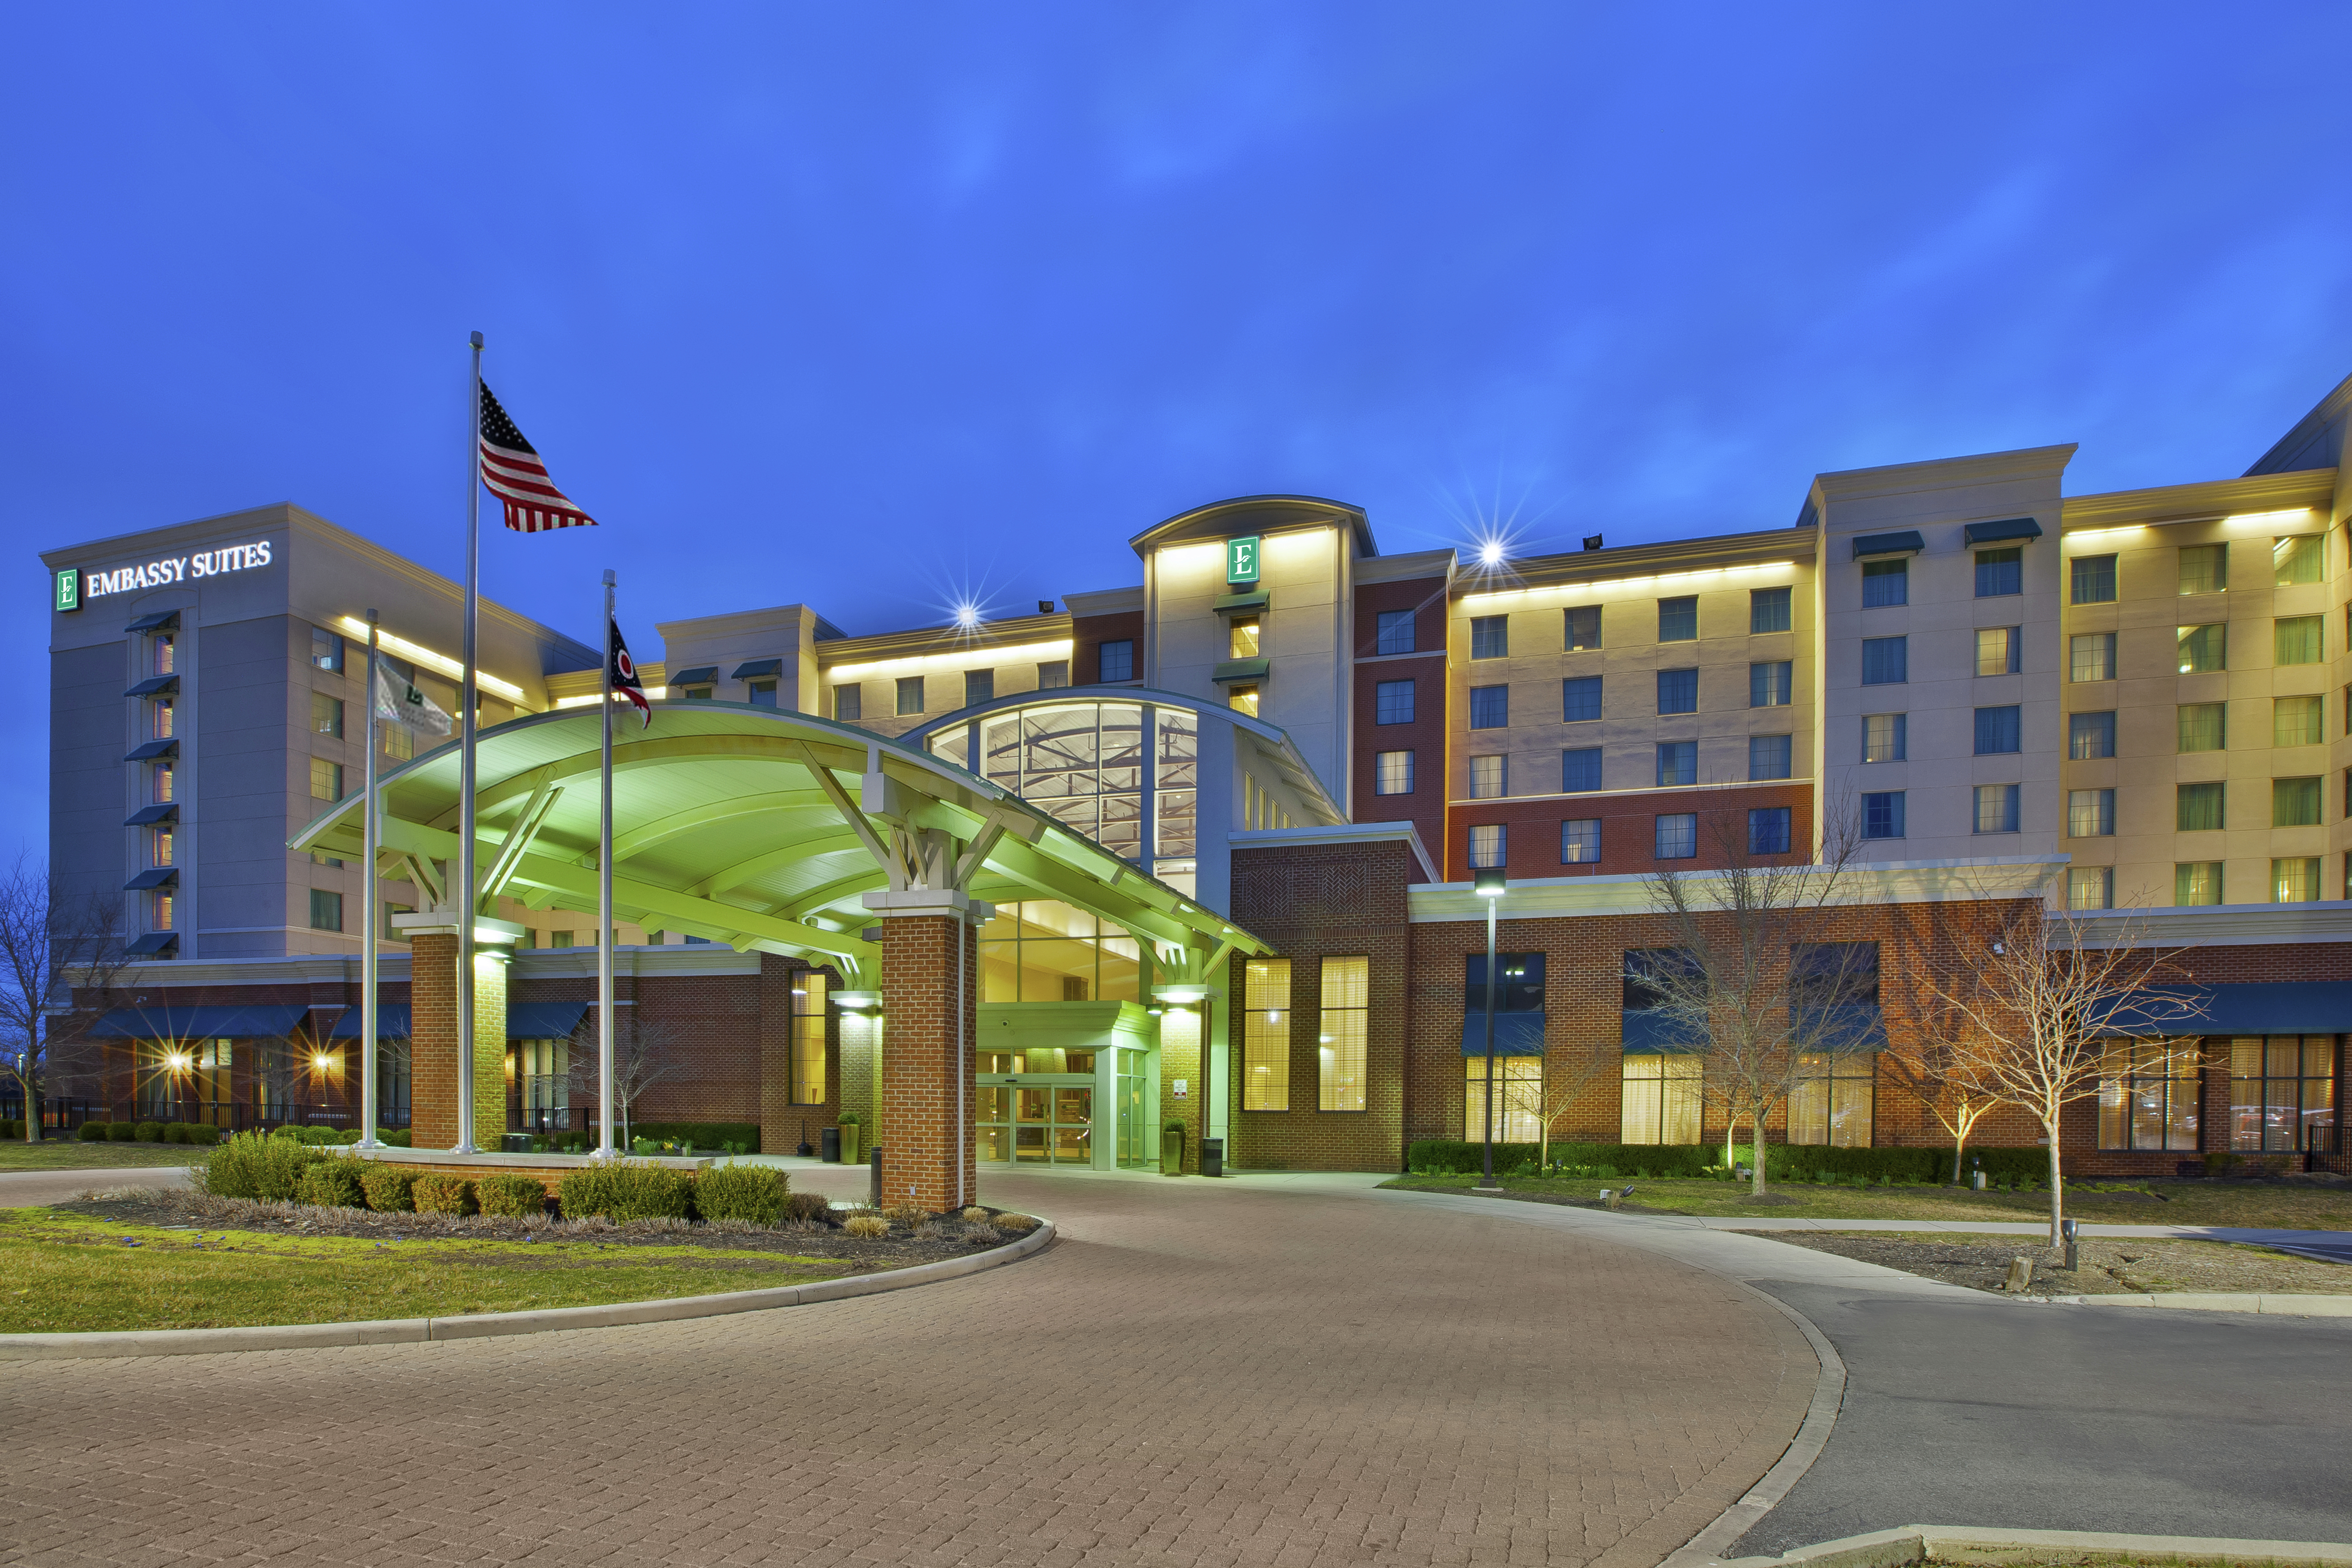 Illuminated Hotel Exterior, Porte Cochère, Flagpoles, and Landscaping at Dusk